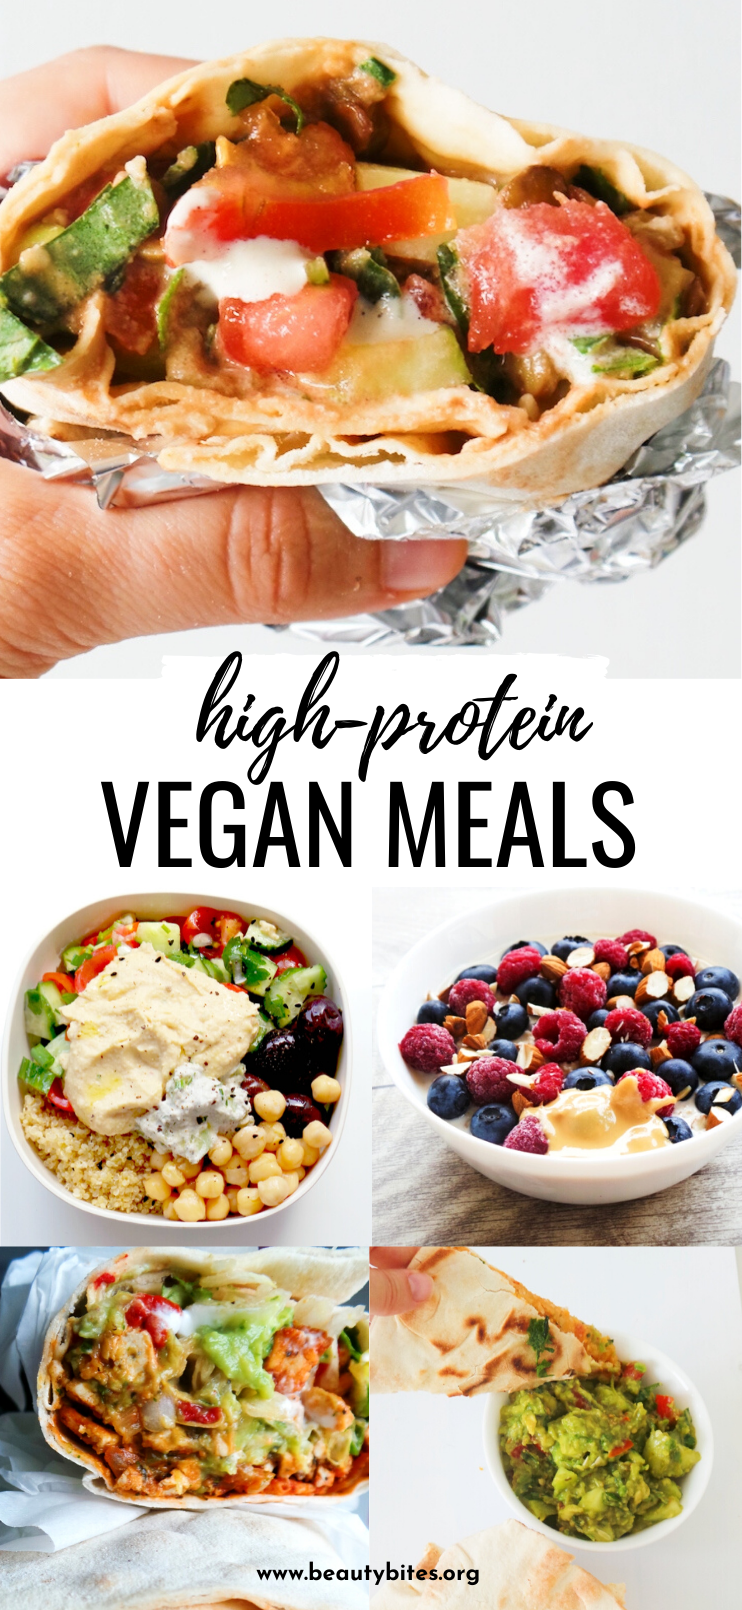 15 Easy High-Protein Vegan Recipes - Beauty Bites -   fitness Meals protein